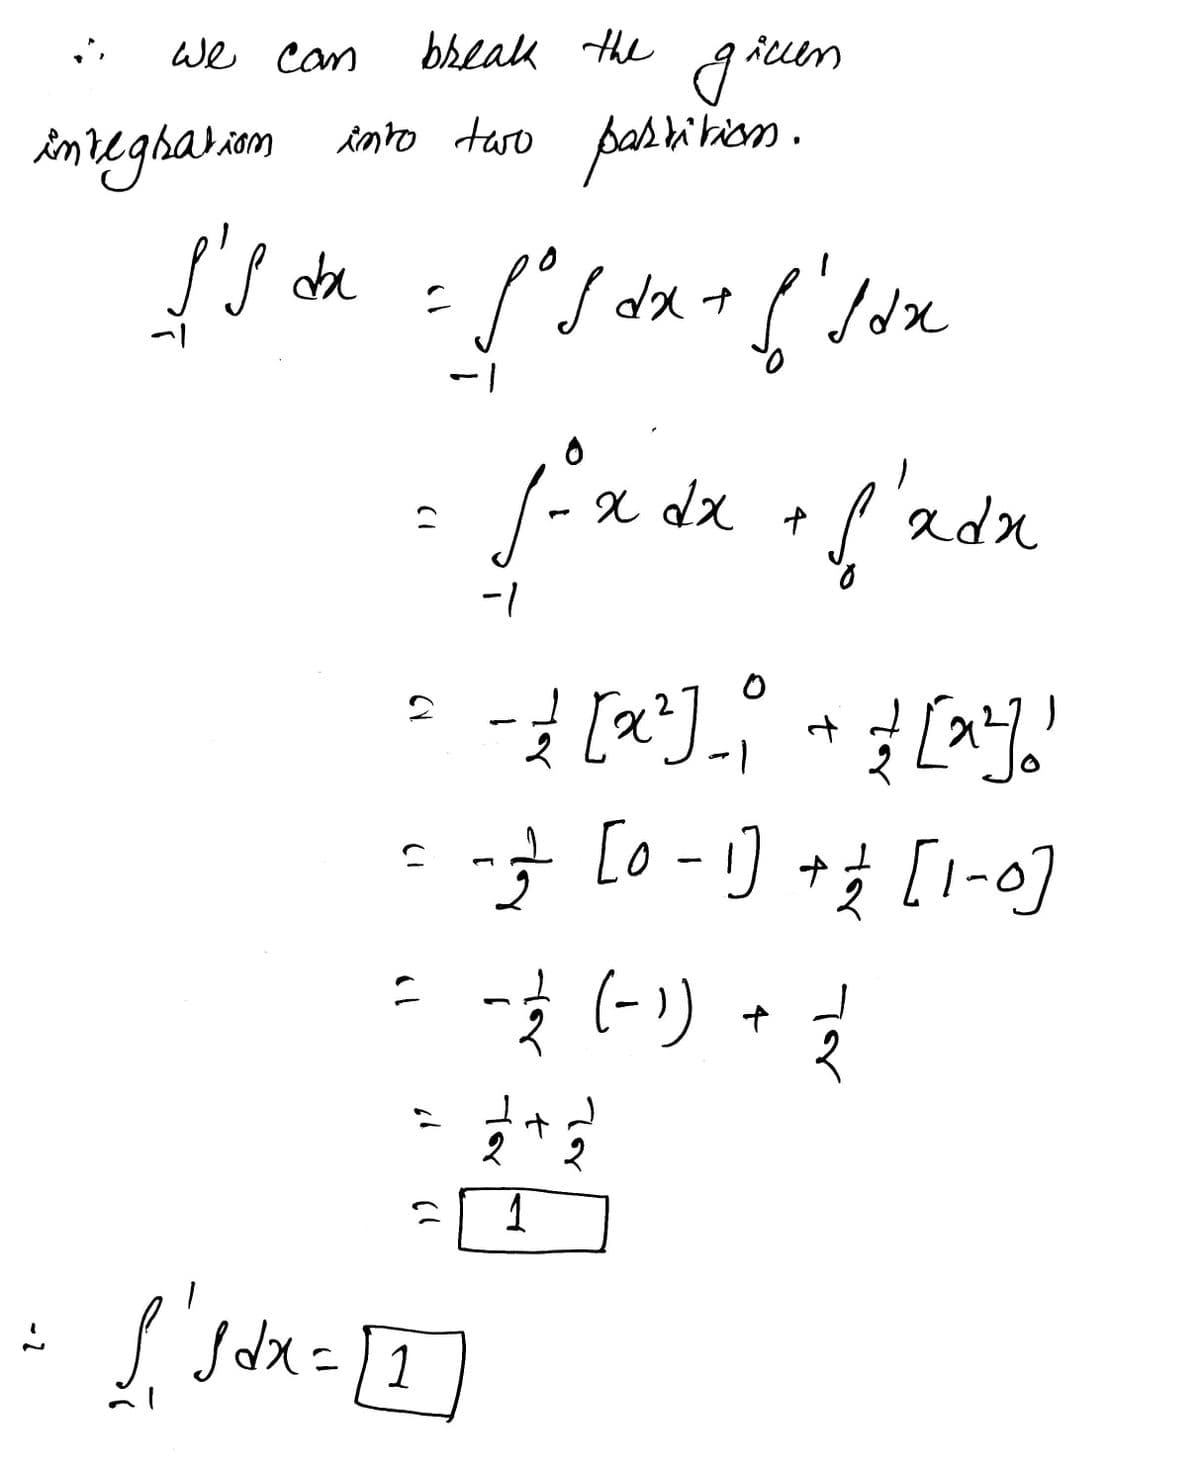 we can
break the
given
integration into two partition.
s's da
=
=
Sºl dx + 6' 1dx
fox dx + f adn
-1
- / [x²] _ ₁ + = [^^]!!
-2 [0 - 1] + 1/2 [1-0]
(V
(1
= - 12/24 (-1) + 22/12
(1
1 sdx = [1
Yor
t
1
راما